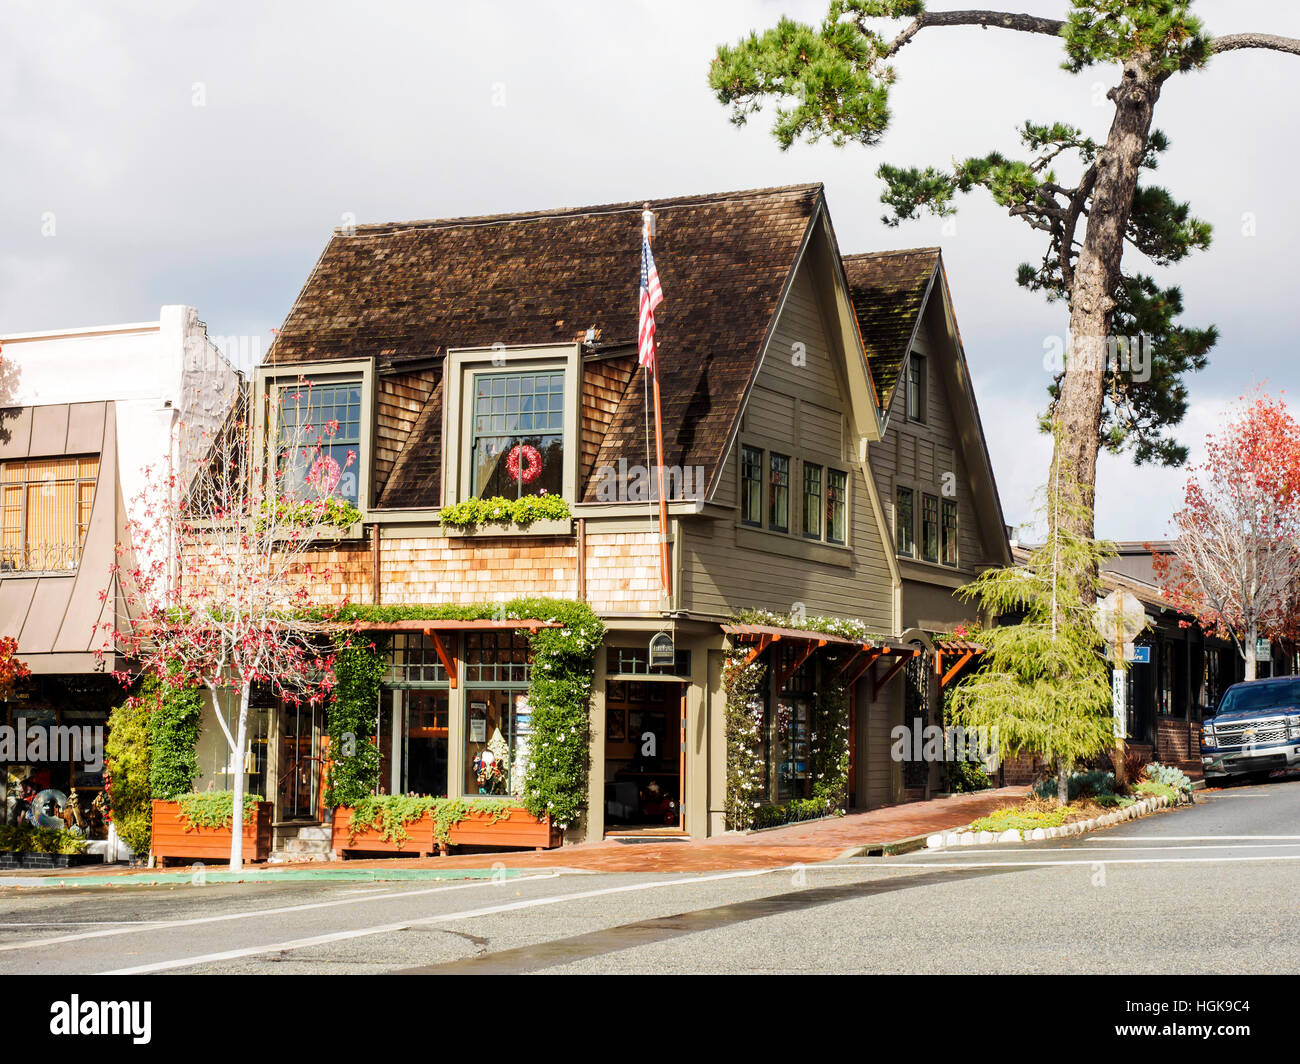 Fairy Tale Cottages In Picturesque Carmel By The Sea A Small City